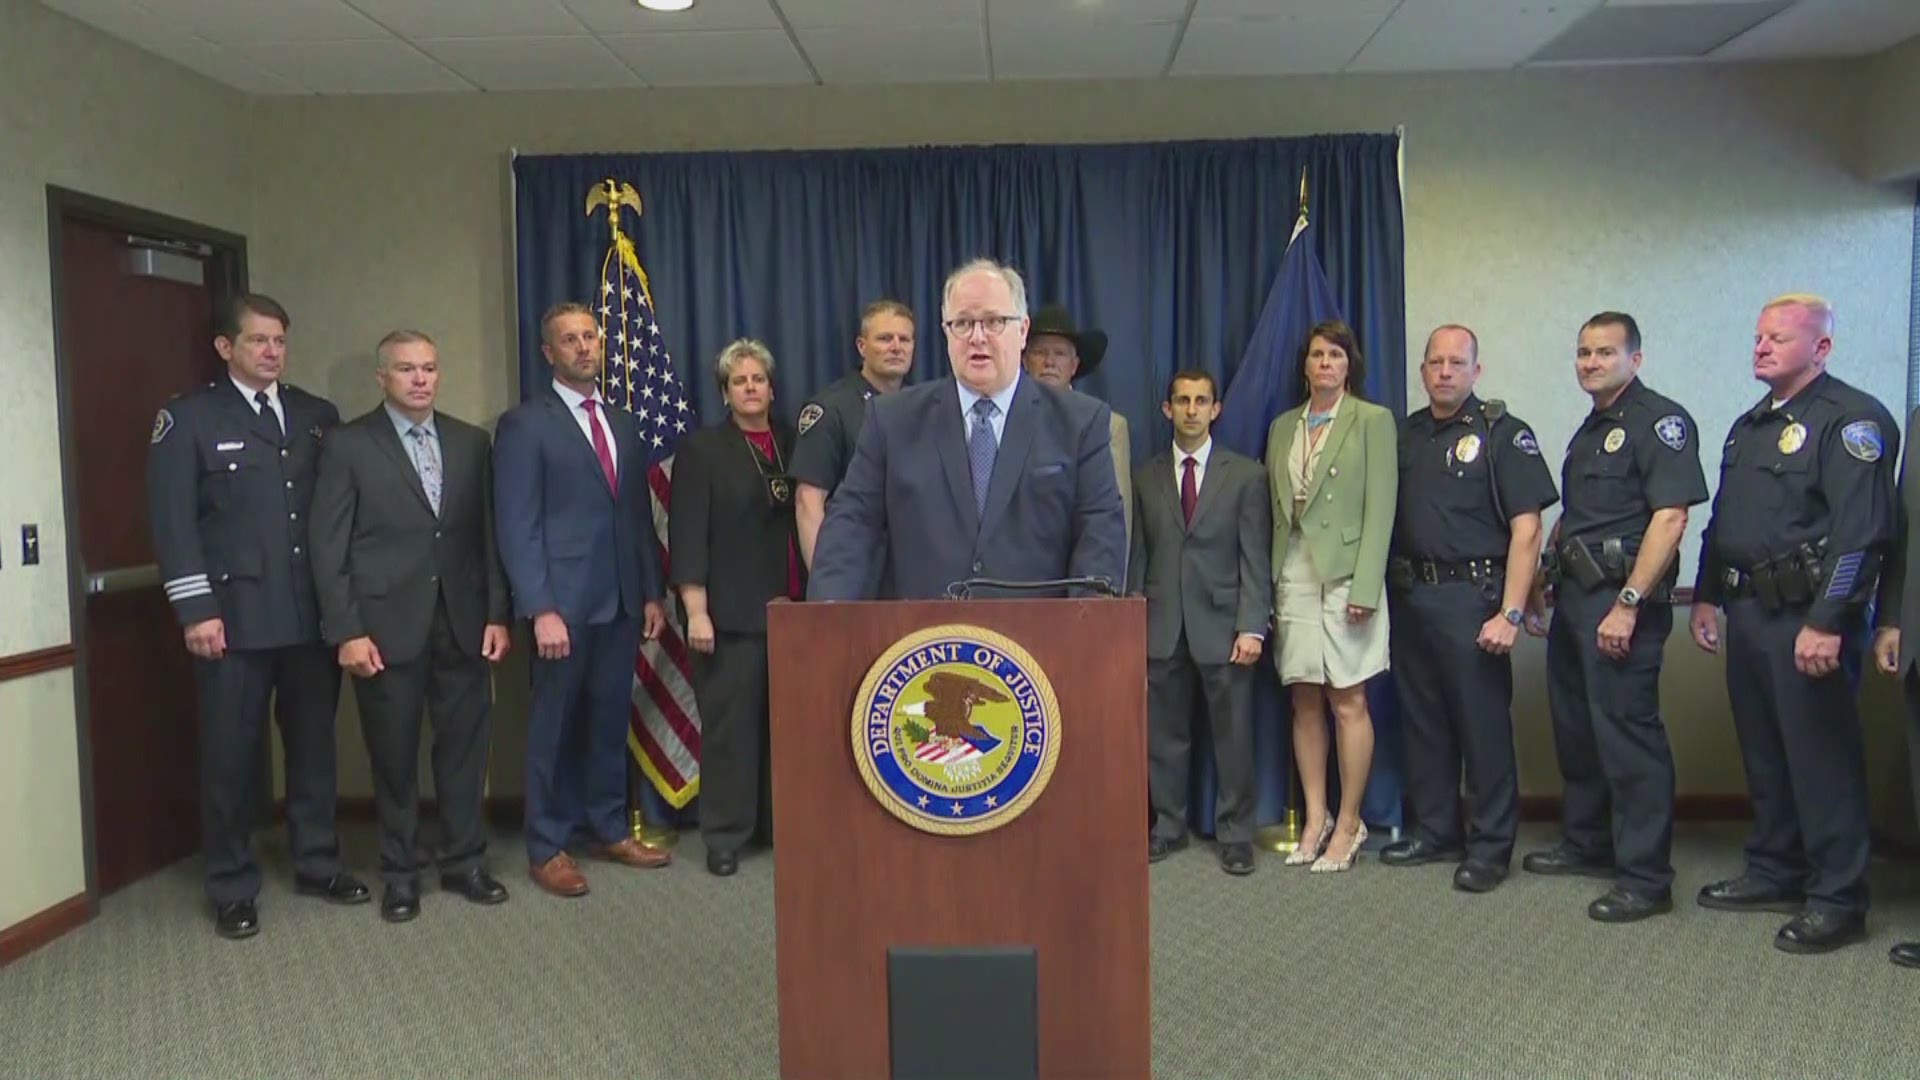 More than a dozen affiliates of two local gangs have been indicted on charges of distributing methamphetamine and illegally possessing firearms, the U.S. Attorney's Office for the District of Idaho announced Thursday.